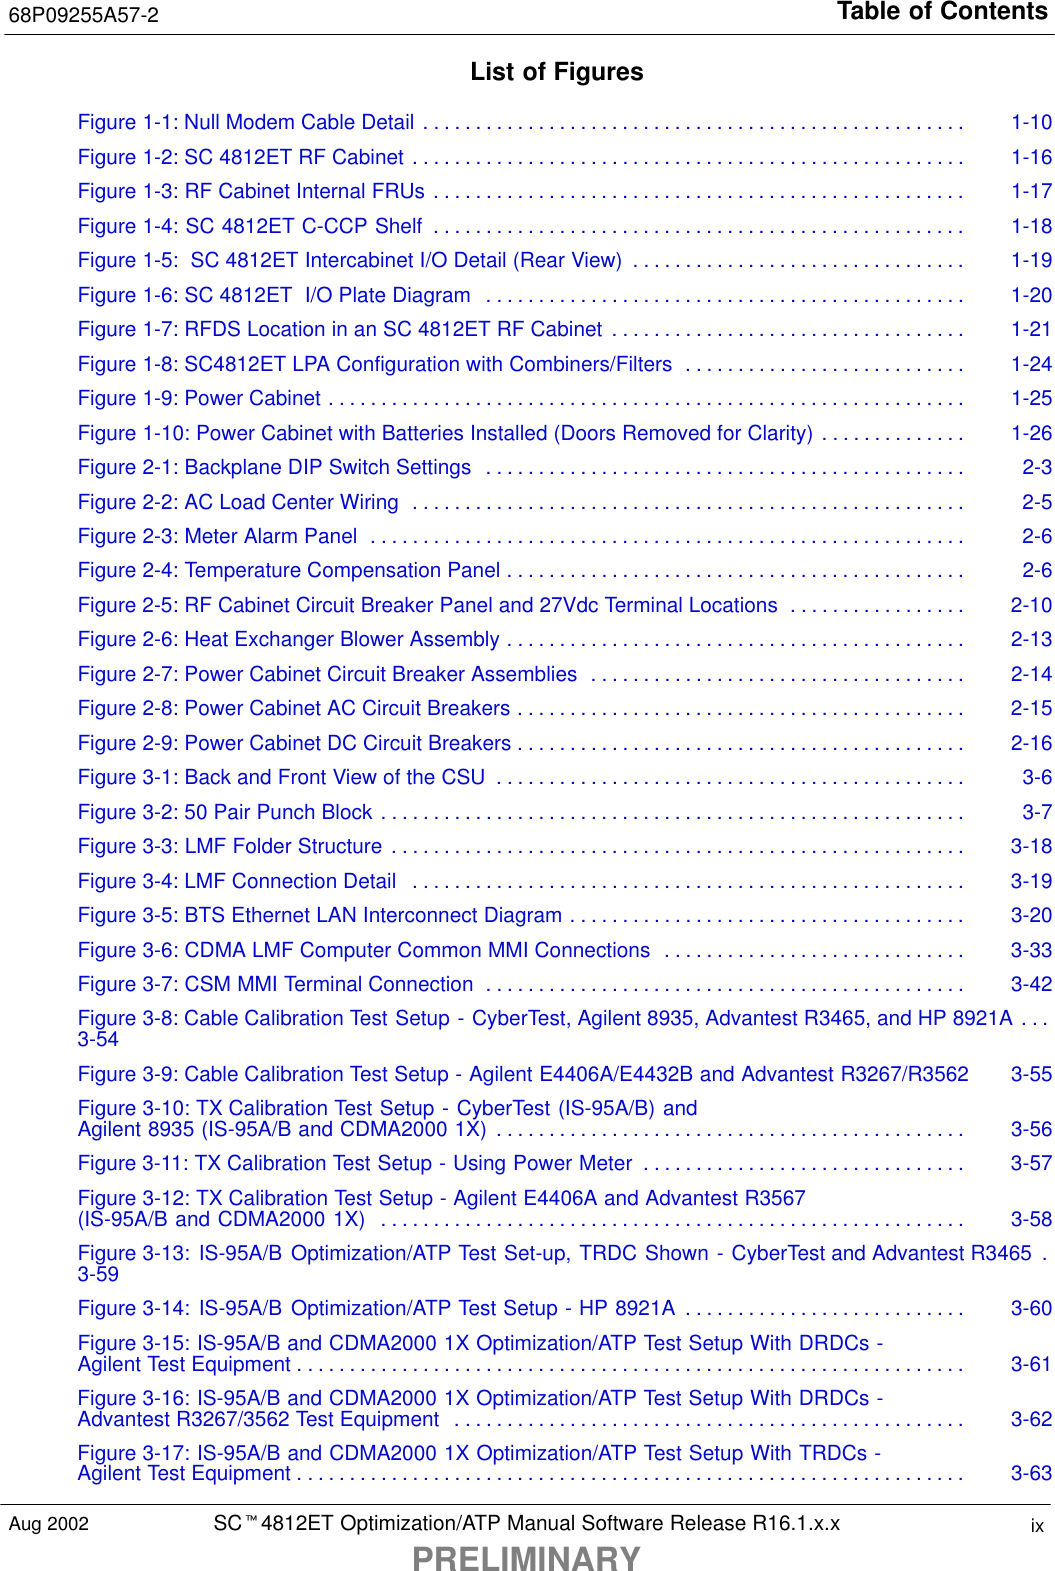 Table of Contents68P09255A57-2SCt4812ET Optimization/ATP Manual Software Release R16.1.x.xPRELIMINARYixAug 2002List of FiguresFigure 1-1: Null Modem Cable Detail 1-10. . . . . . . . . . . . . . . . . . . . . . . . . . . . . . . . . . . . . . . . . . . . . . . . . . . . Figure 1-2: SC 4812ET RF Cabinet 1-16. . . . . . . . . . . . . . . . . . . . . . . . . . . . . . . . . . . . . . . . . . . . . . . . . . . . . Figure 1-3: RF Cabinet Internal FRUs 1-17. . . . . . . . . . . . . . . . . . . . . . . . . . . . . . . . . . . . . . . . . . . . . . . . . . . Figure 1-4: SC 4812ET C-CCP Shelf 1-18. . . . . . . . . . . . . . . . . . . . . . . . . . . . . . . . . . . . . . . . . . . . . . . . . . . Figure 1-5:  SC 4812ET Intercabinet I/O Detail (Rear View) 1-19. . . . . . . . . . . . . . . . . . . . . . . . . . . . . . . . Figure 1-6: SC 4812ET  I/O Plate Diagram 1-20. . . . . . . . . . . . . . . . . . . . . . . . . . . . . . . . . . . . . . . . . . . . . . Figure 1-7: RFDS Location in an SC 4812ET RF Cabinet 1-21. . . . . . . . . . . . . . . . . . . . . . . . . . . . . . . . . . Figure 1-8: SC4812ET LPA Configuration with Combiners/Filters 1-24. . . . . . . . . . . . . . . . . . . . . . . . . . . Figure 1-9: Power Cabinet 1-25. . . . . . . . . . . . . . . . . . . . . . . . . . . . . . . . . . . . . . . . . . . . . . . . . . . . . . . . . . . . . Figure 1-10: Power Cabinet with Batteries Installed (Doors Removed for Clarity) 1-26. . . . . . . . . . . . . . Figure 2-1: Backplane DIP Switch Settings 2-3. . . . . . . . . . . . . . . . . . . . . . . . . . . . . . . . . . . . . . . . . . . . . . Figure 2-2: AC Load Center Wiring 2-5. . . . . . . . . . . . . . . . . . . . . . . . . . . . . . . . . . . . . . . . . . . . . . . . . . . . . Figure 2-3: Meter Alarm Panel 2-6. . . . . . . . . . . . . . . . . . . . . . . . . . . . . . . . . . . . . . . . . . . . . . . . . . . . . . . . . Figure 2-4: Temperature Compensation Panel 2-6. . . . . . . . . . . . . . . . . . . . . . . . . . . . . . . . . . . . . . . . . . . . Figure 2-5: RF Cabinet Circuit Breaker Panel and 27Vdc Terminal Locations 2-10. . . . . . . . . . . . . . . . . Figure 2-6: Heat Exchanger Blower Assembly 2-13. . . . . . . . . . . . . . . . . . . . . . . . . . . . . . . . . . . . . . . . . . . . Figure 2-7: Power Cabinet Circuit Breaker Assemblies 2-14. . . . . . . . . . . . . . . . . . . . . . . . . . . . . . . . . . . . Figure 2-8: Power Cabinet AC Circuit Breakers 2-15. . . . . . . . . . . . . . . . . . . . . . . . . . . . . . . . . . . . . . . . . . . Figure 2-9: Power Cabinet DC Circuit Breakers 2-16. . . . . . . . . . . . . . . . . . . . . . . . . . . . . . . . . . . . . . . . . . . Figure 3-1: Back and Front View of the CSU 3-6. . . . . . . . . . . . . . . . . . . . . . . . . . . . . . . . . . . . . . . . . . . . . Figure 3-2: 50 Pair Punch Block 3-7. . . . . . . . . . . . . . . . . . . . . . . . . . . . . . . . . . . . . . . . . . . . . . . . . . . . . . . . Figure 3-3: LMF Folder Structure 3-18. . . . . . . . . . . . . . . . . . . . . . . . . . . . . . . . . . . . . . . . . . . . . . . . . . . . . . . Figure 3-4: LMF Connection Detail 3-19. . . . . . . . . . . . . . . . . . . . . . . . . . . . . . . . . . . . . . . . . . . . . . . . . . . . . Figure 3-5: BTS Ethernet LAN Interconnect Diagram 3-20. . . . . . . . . . . . . . . . . . . . . . . . . . . . . . . . . . . . . . Figure 3-6: CDMA LMF Computer Common MMI Connections 3-33. . . . . . . . . . . . . . . . . . . . . . . . . . . . . Figure 3-7: CSM MMI Terminal Connection 3-42. . . . . . . . . . . . . . . . . . . . . . . . . . . . . . . . . . . . . . . . . . . . . . Figure 3-8: Cable Calibration Test Setup - CyberTest, Agilent 8935, Advantest R3465, and HP 8921A . . . 3-54Figure 3-9: Cable Calibration Test Setup - Agilent E4406A/E4432B and Advantest R3267/R3562 3-55Figure 3-10: TX Calibration Test Setup - CyberTest (IS-95A/B) and Agilent 8935 (IS-95A/B and CDMA2000 1X) 3-56. . . . . . . . . . . . . . . . . . . . . . . . . . . . . . . . . . . . . . . . . . . . . Figure 3-11: TX Calibration Test Setup - Using Power Meter 3-57. . . . . . . . . . . . . . . . . . . . . . . . . . . . . . . Figure 3-12: TX Calibration Test Setup - Agilent E4406A and Advantest R3567 (IS-95A/B and CDMA2000 1X) 3-58. . . . . . . . . . . . . . . . . . . . . . . . . . . . . . . . . . . . . . . . . . . . . . . . . . . . . . . . Figure 3-13: IS-95A/B Optimization/ATP Test Set-up, TRDC Shown - CyberTest and Advantest R3465 . 3-59Figure 3-14: IS-95A/B Optimization/ATP Test Setup - HP 8921A 3-60. . . . . . . . . . . . . . . . . . . . . . . . . . . Figure 3-15: IS-95A/B and CDMA2000 1X Optimization/ATP Test Setup With DRDCs - Agilent Test Equipment 3-61. . . . . . . . . . . . . . . . . . . . . . . . . . . . . . . . . . . . . . . . . . . . . . . . . . . . . . . . . . . . . . . . Figure 3-16: IS-95A/B and CDMA2000 1X Optimization/ATP Test Setup With DRDCs - Advantest R3267/3562 Test Equipment 3-62. . . . . . . . . . . . . . . . . . . . . . . . . . . . . . . . . . . . . . . . . . . . . . . . . Figure 3-17: IS-95A/B and CDMA2000 1X Optimization/ATP Test Setup With TRDCs - Agilent Test Equipment 3-63. . . . . . . . . . . . . . . . . . . . . . . . . . . . . . . . . . . . . . . . . . . . . . . . . . . . . . . . . . . . . . . . 